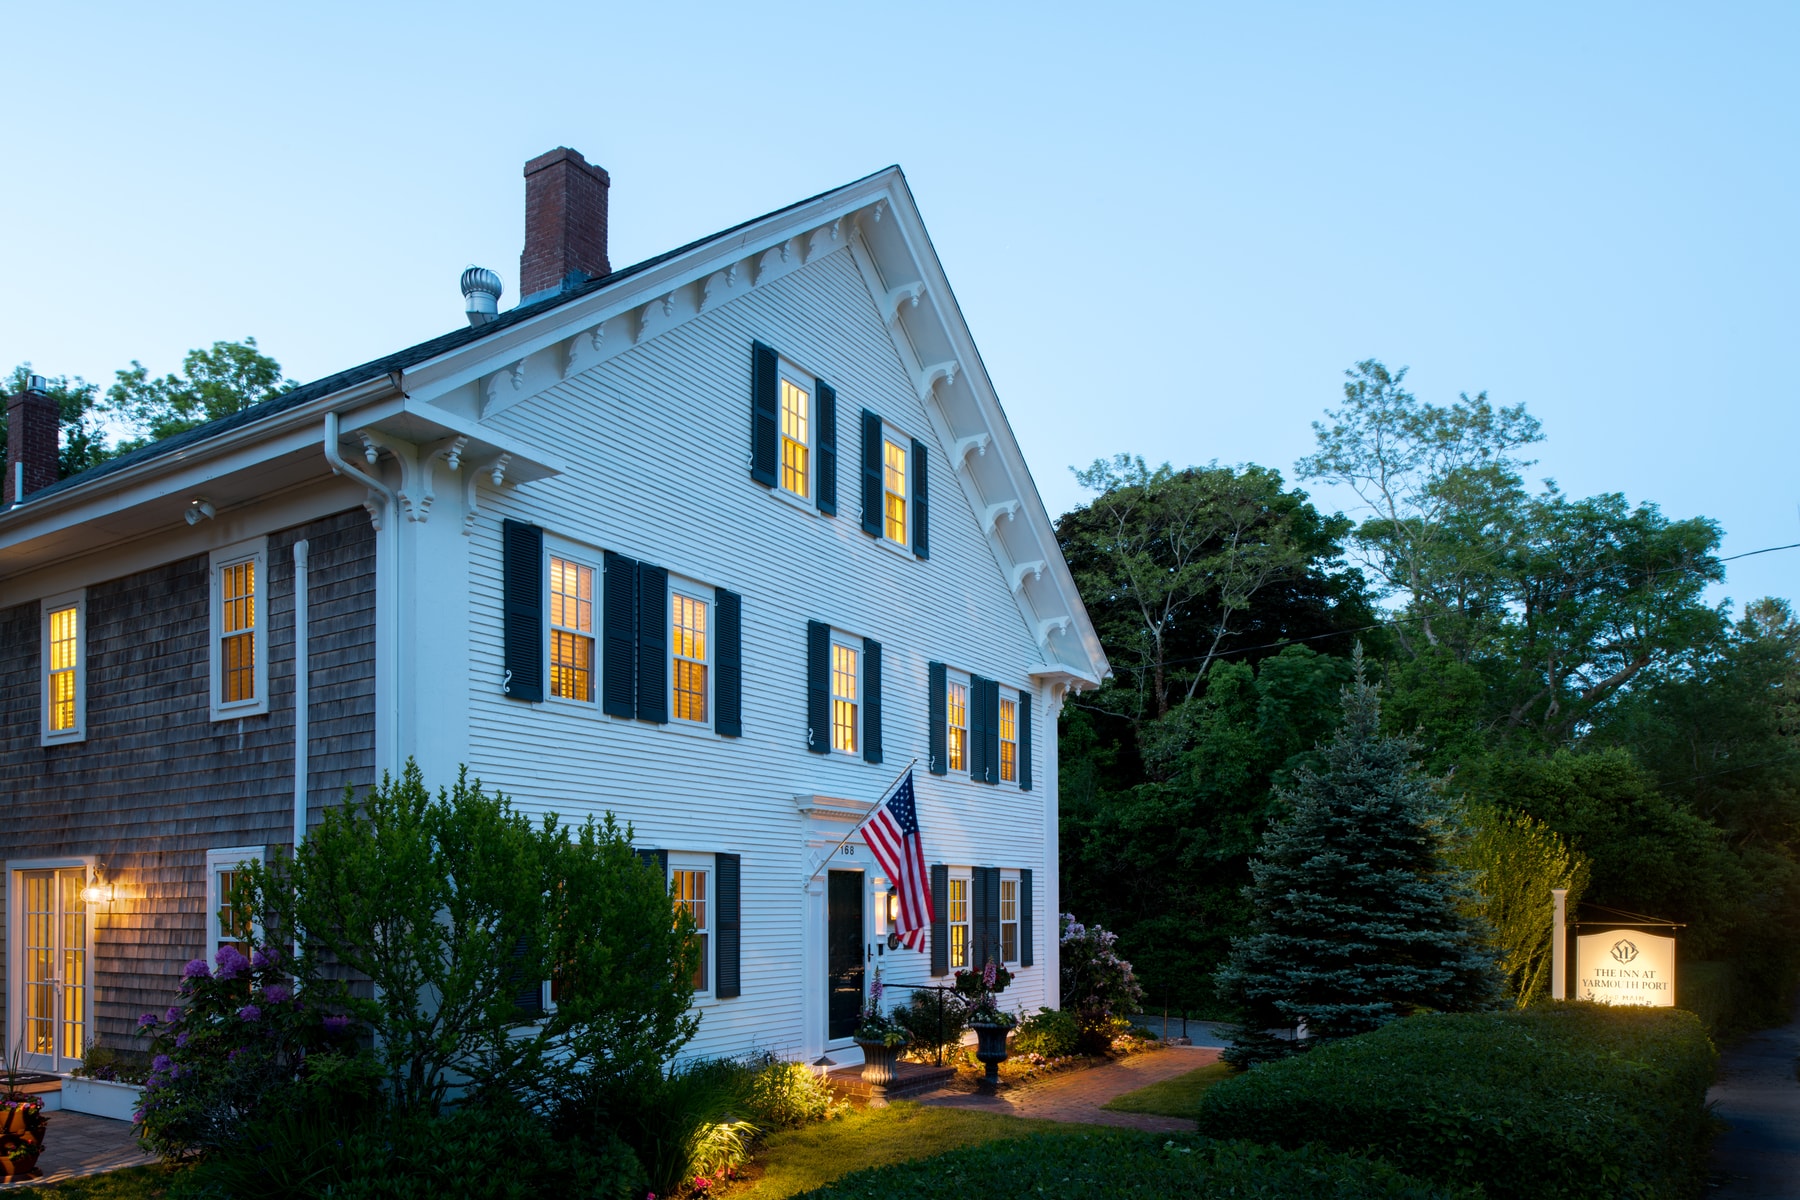 Why People Give 5-Star Ratings to The Inn at Yarmouth Port